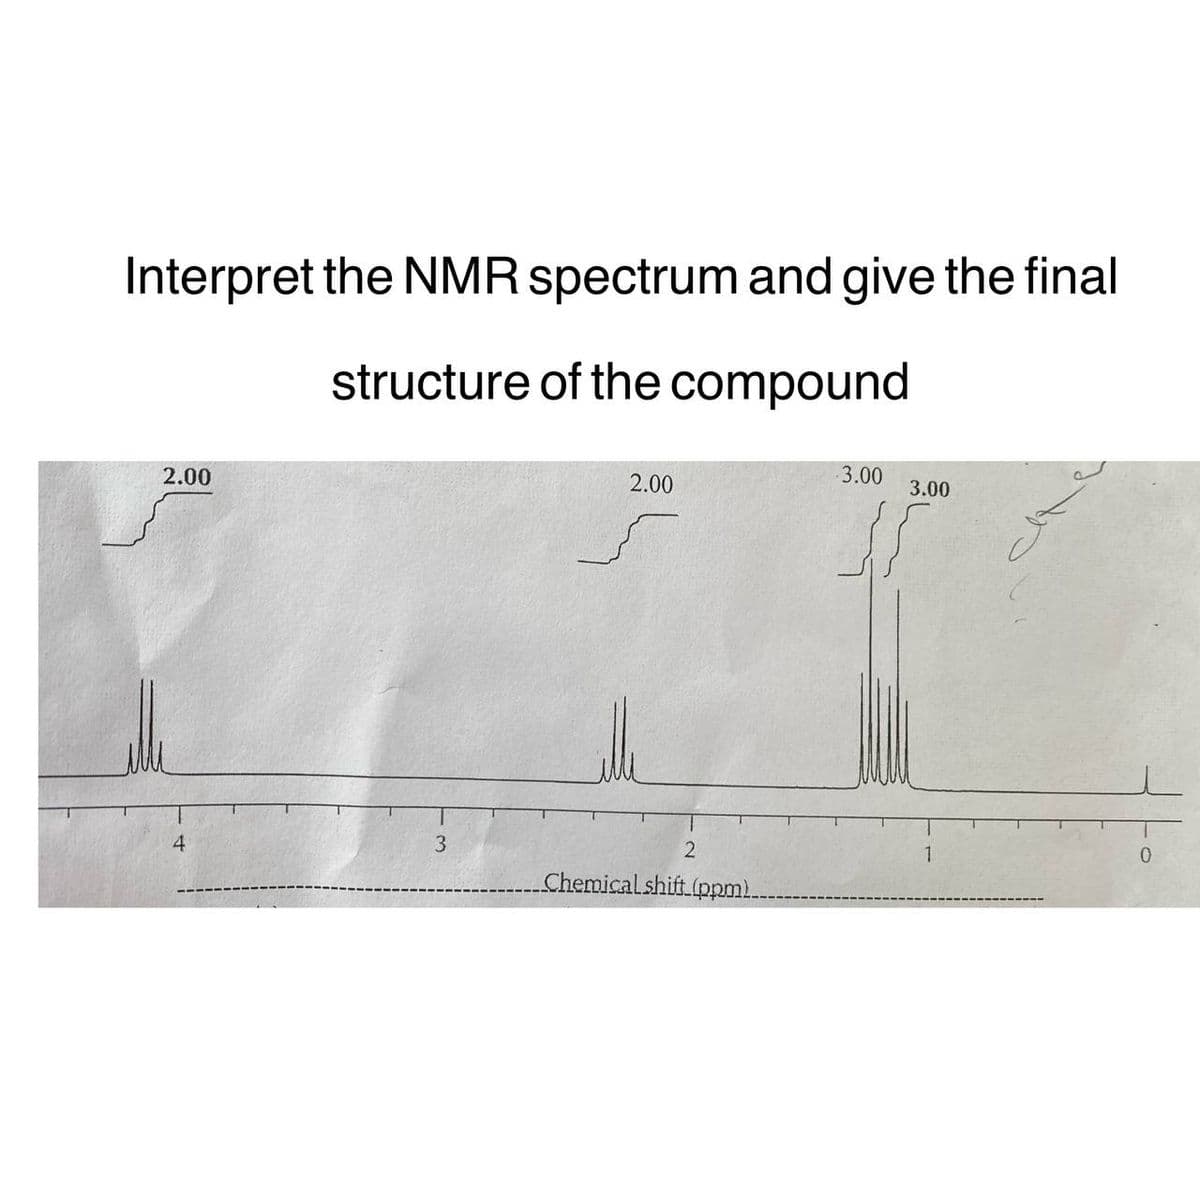 Interpret the NMR spectrum and give the final
structure of the compound
2.00
4
3
2.00
2
Chemical shift (ppm)..
3.00
3.00
1
0